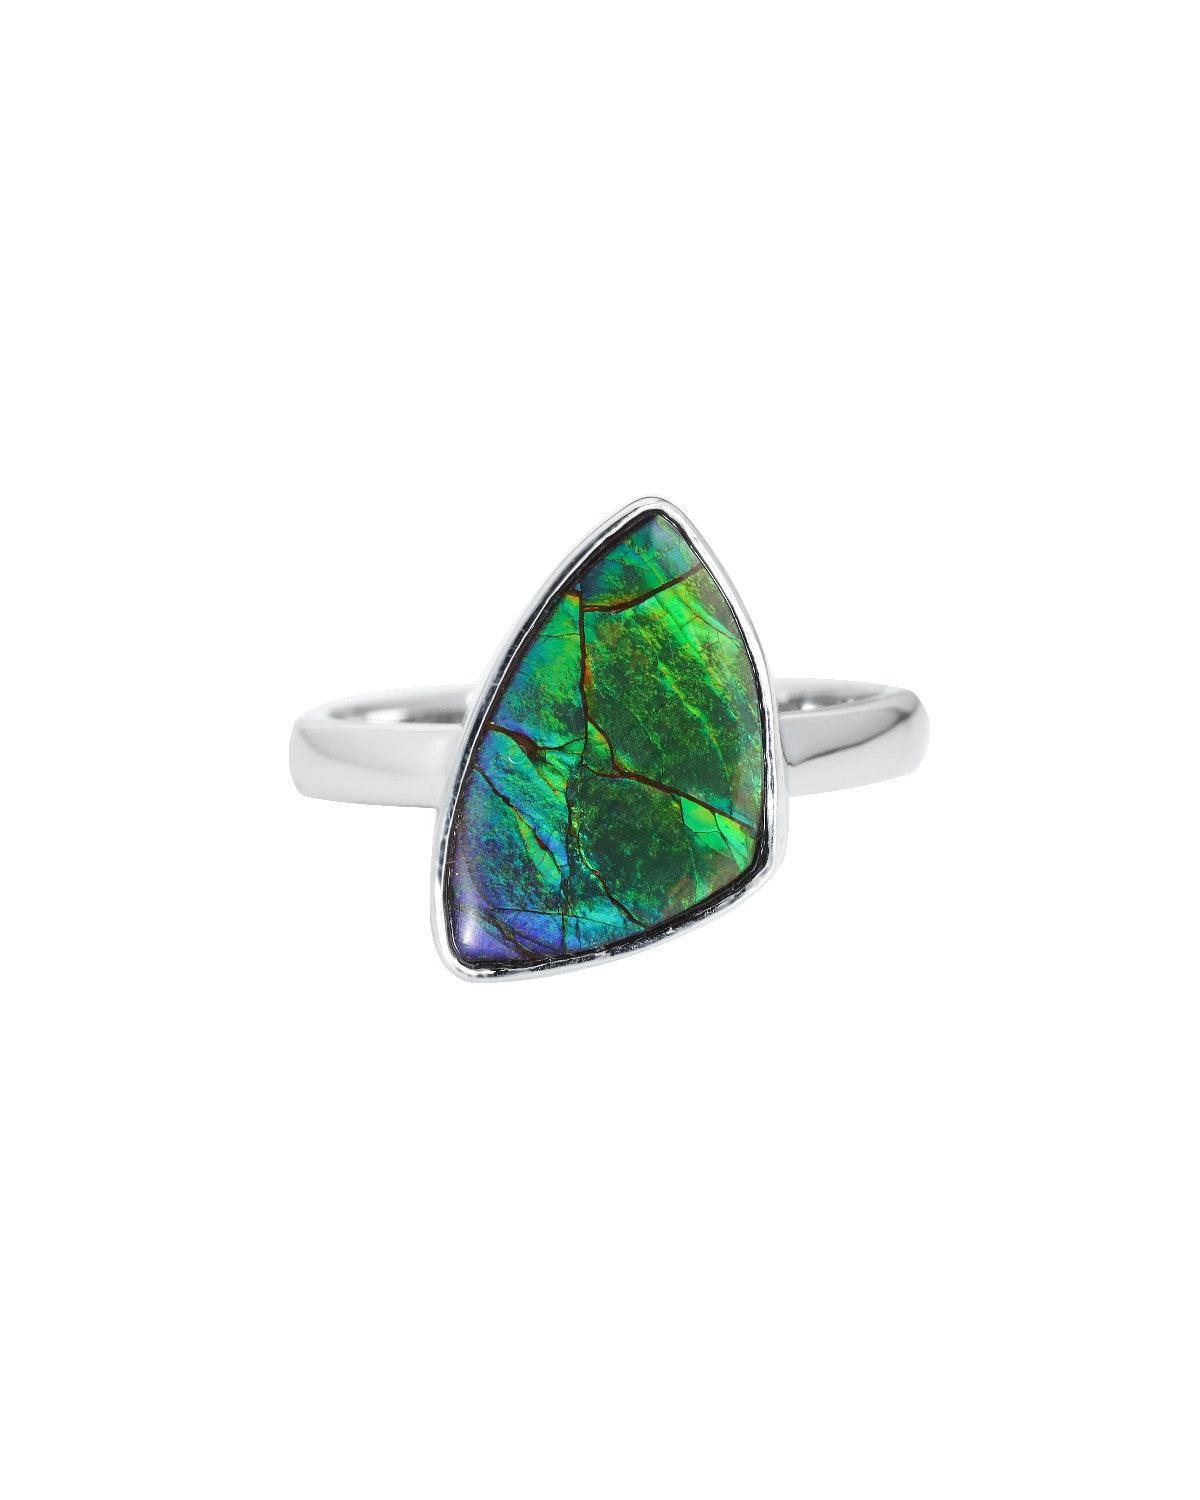 5.7 Ct. Ammolite Solid 925 Sterling Silver Ring Jewelry - YoTreasure